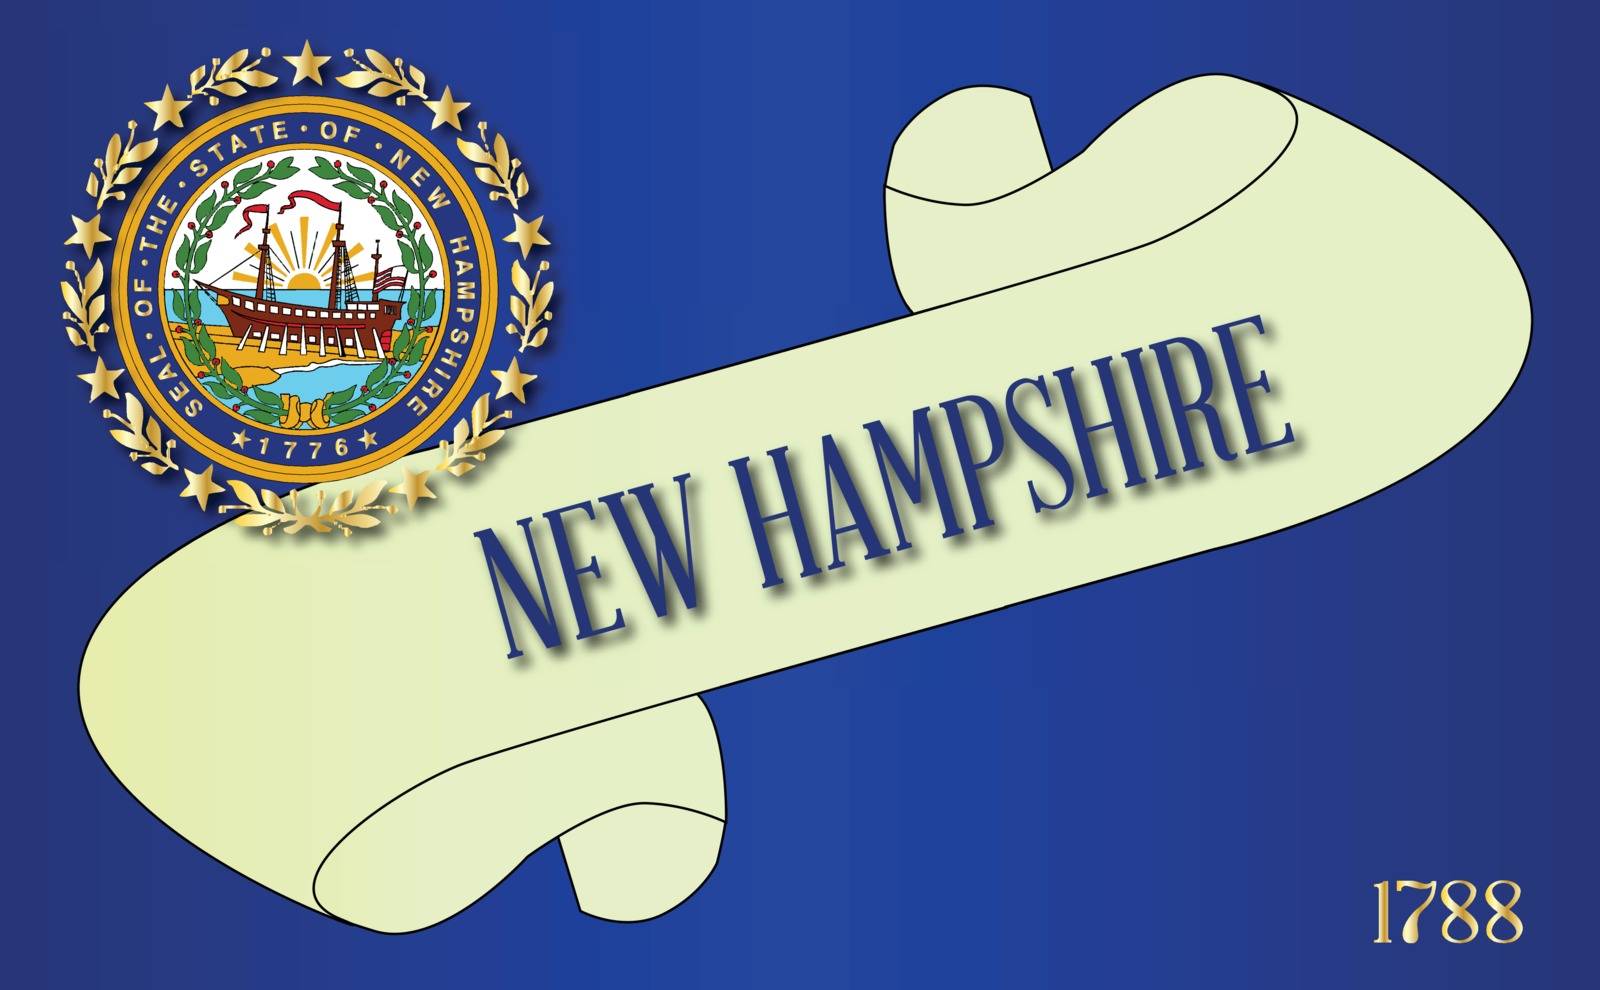 A scroll with the text New Hampshire with the flag of the state detail